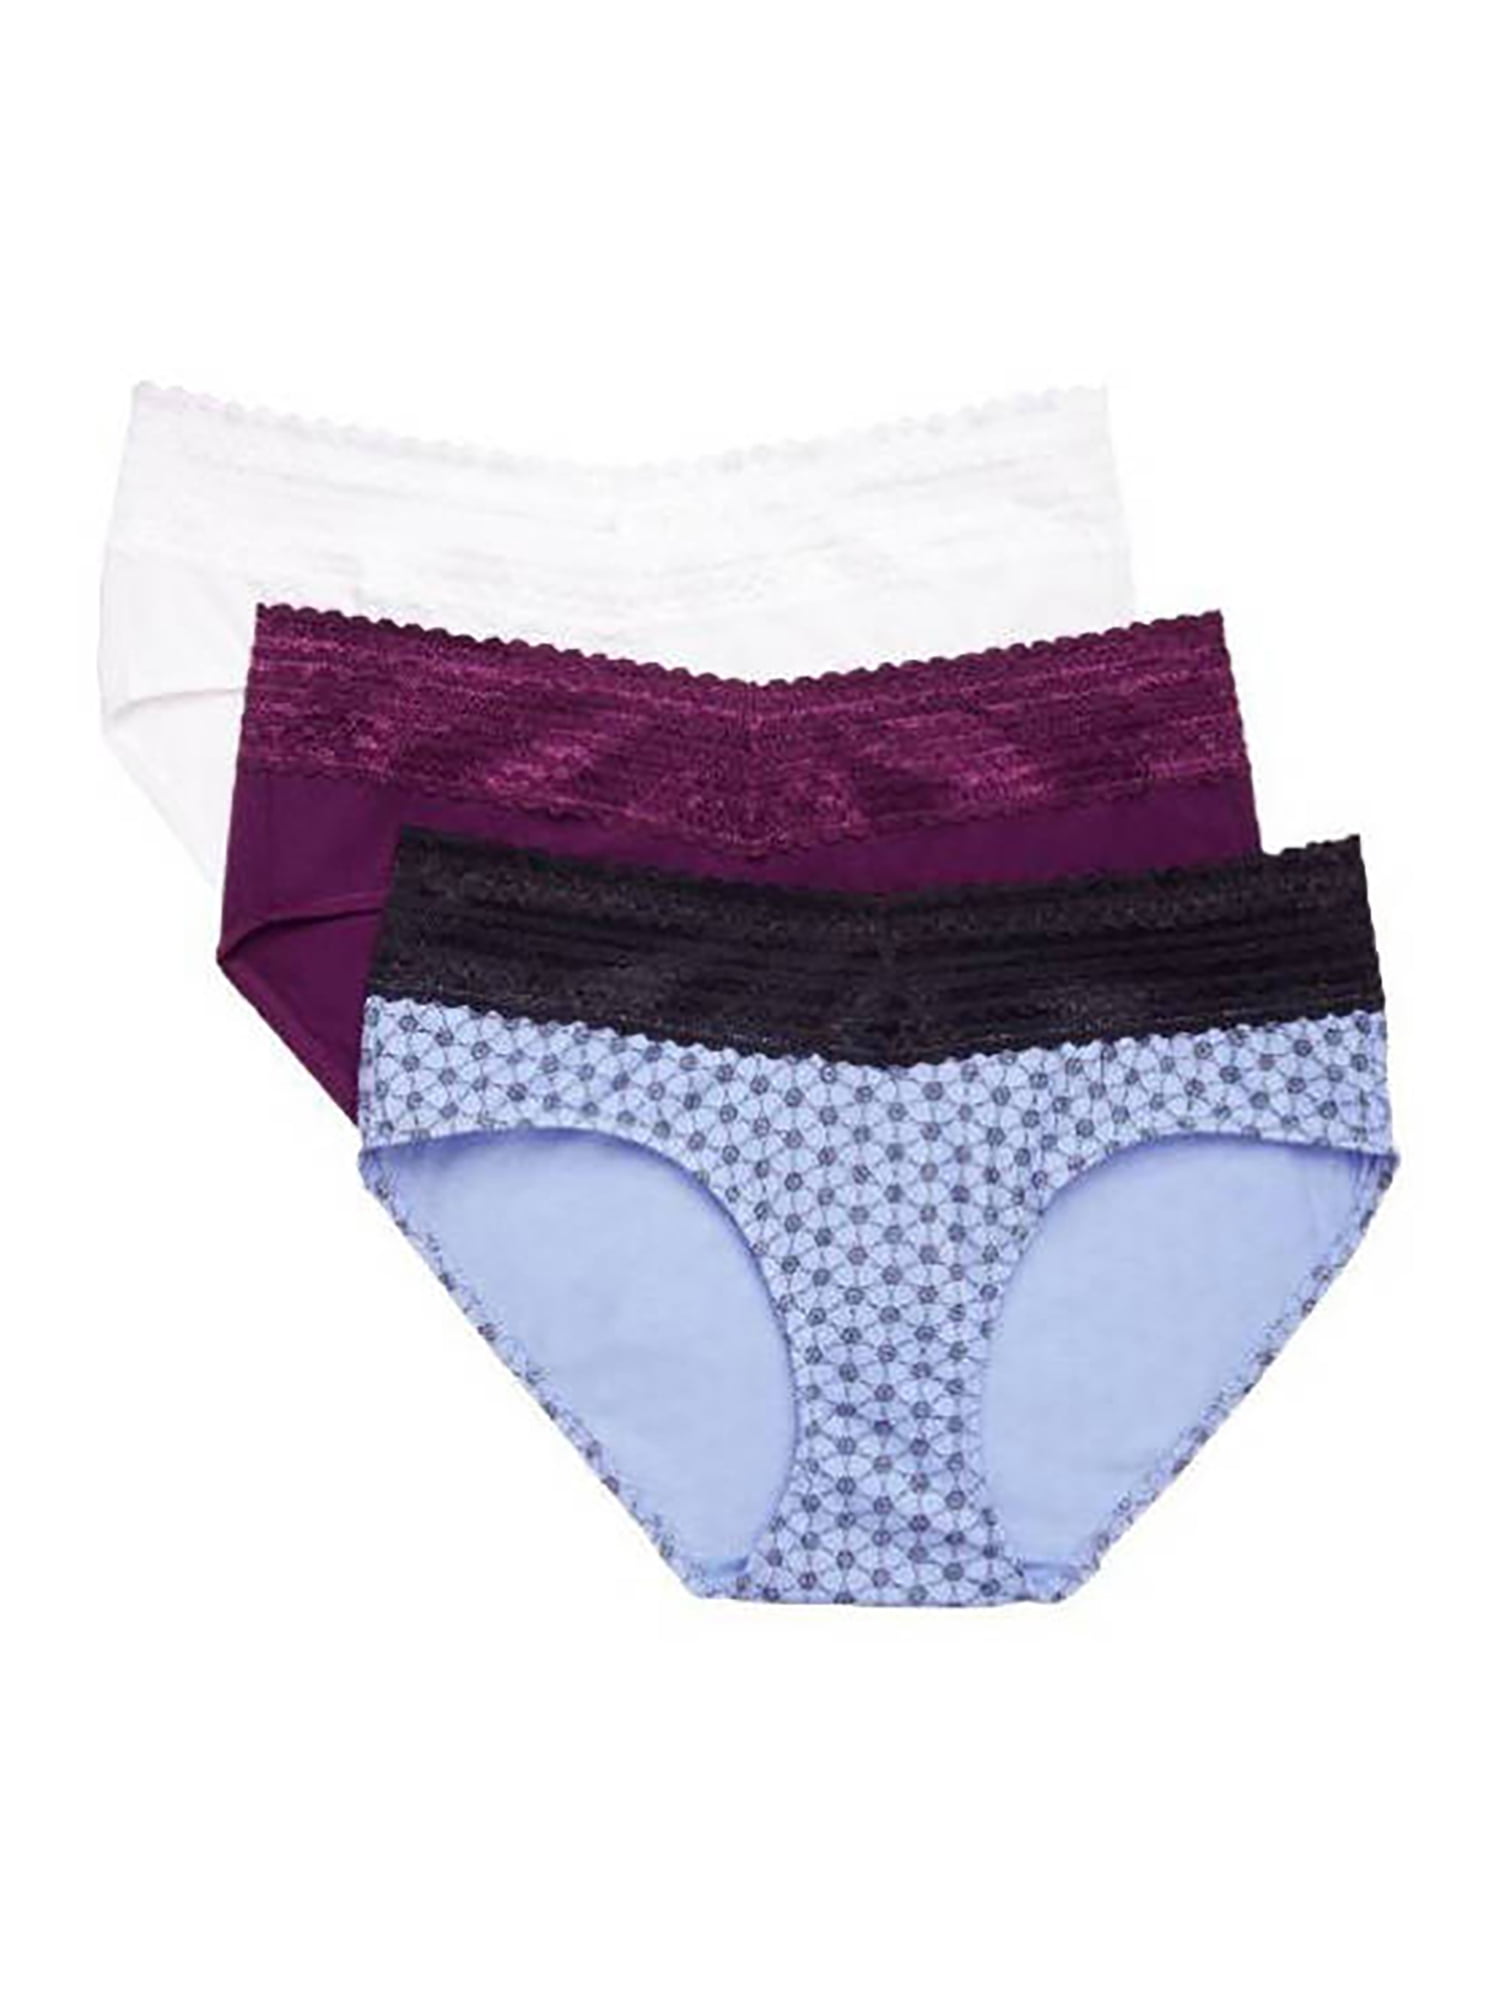 Blissful Benefits by Warner's Women's No Muffin Top Cotton Stretch Lace  Hipster Panties 3-Pack, Style RU0093W